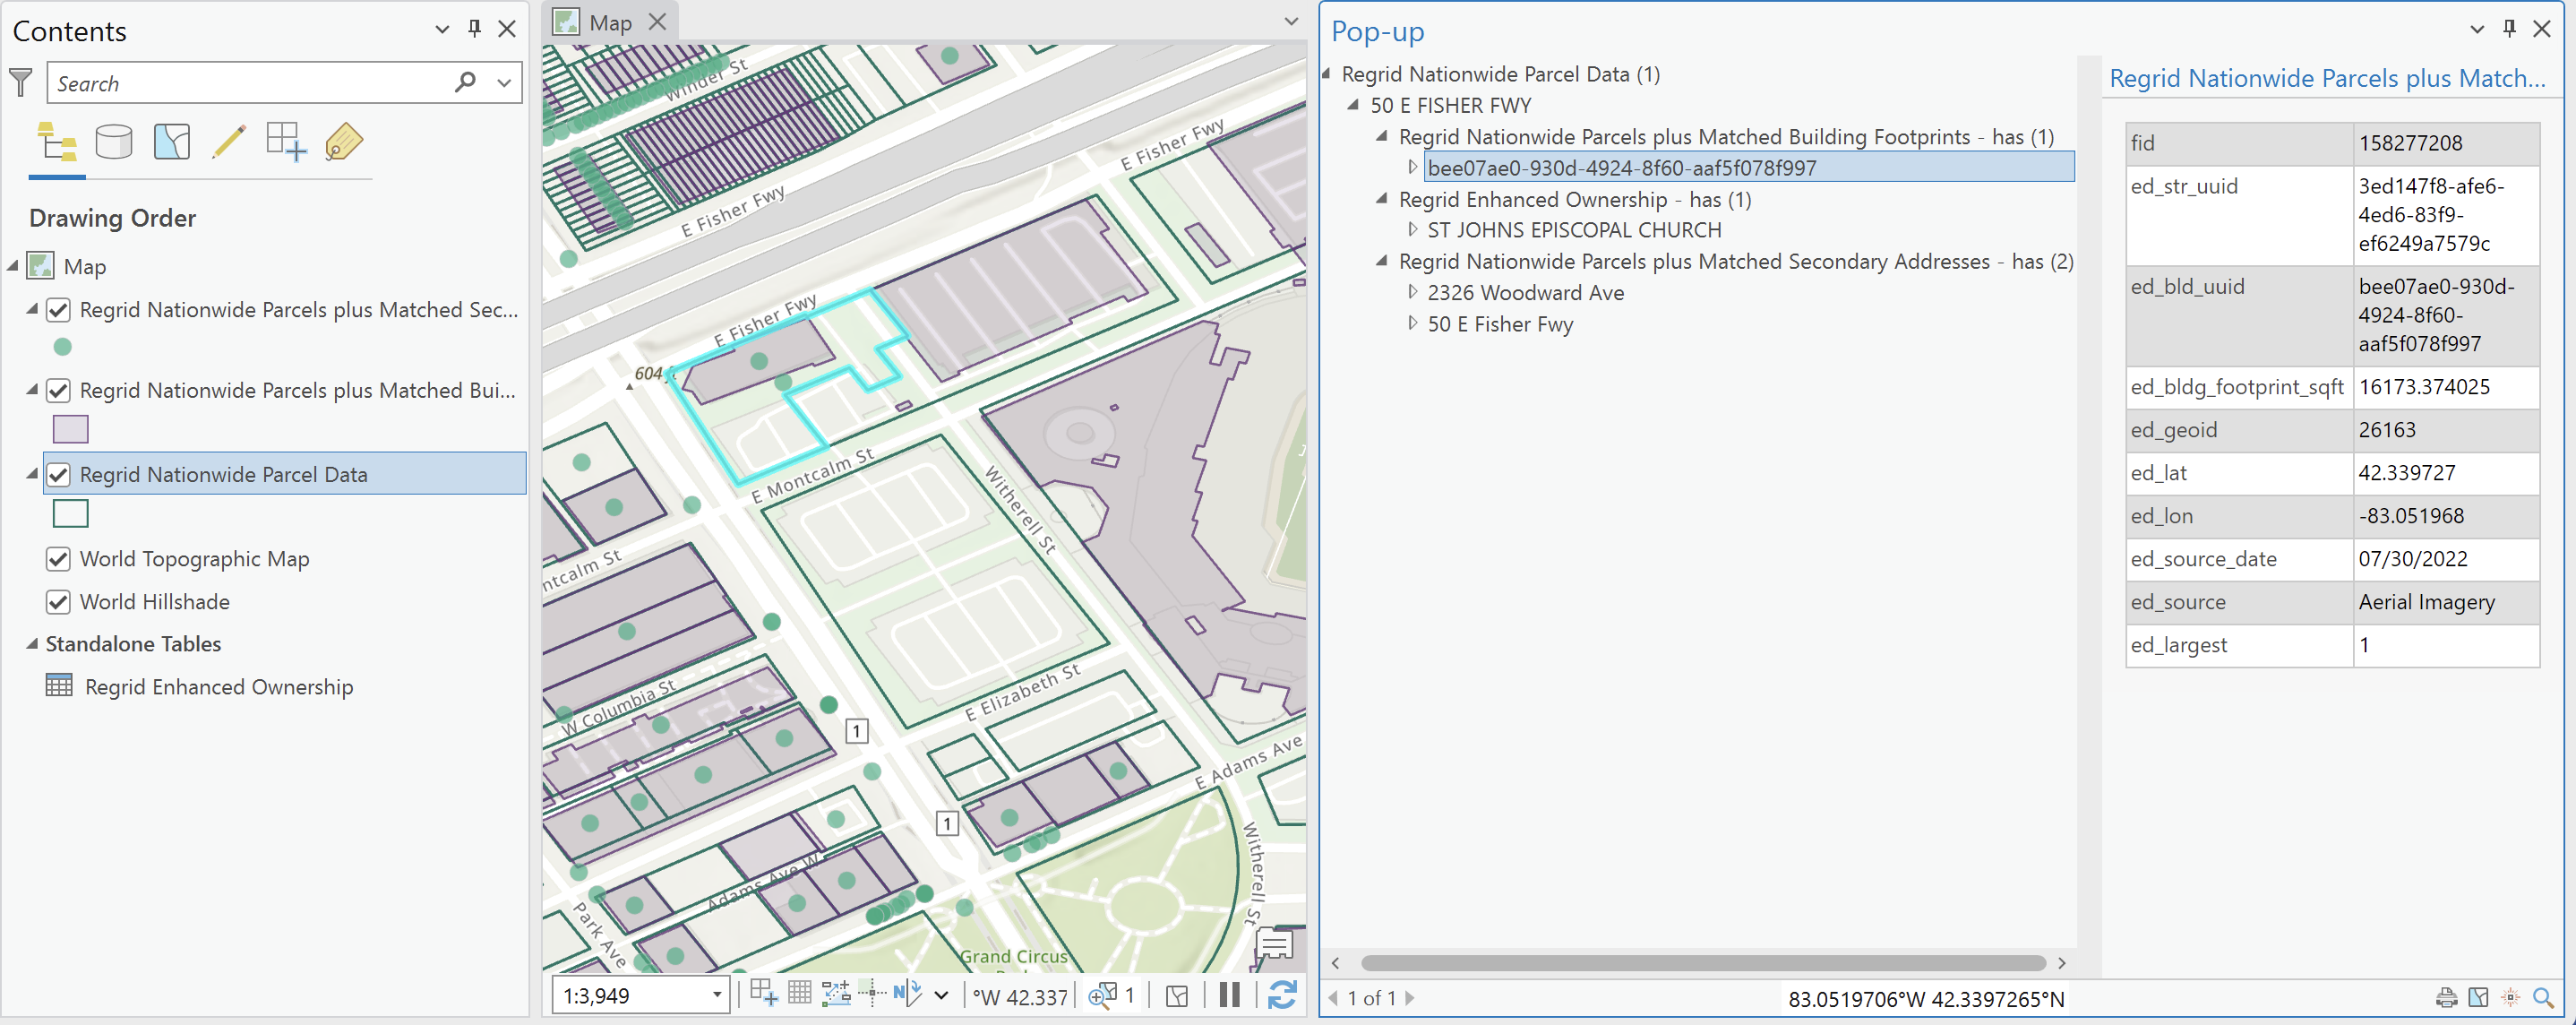 Accessing related records for a selected parcel in ArcGIS Pro via the Attributes Pane. The pane in the right, shows the details of one of the buildings on the parcel. This parcel's related records include one record in Enhanced Ownership and two in Matched Secondary Addresses.